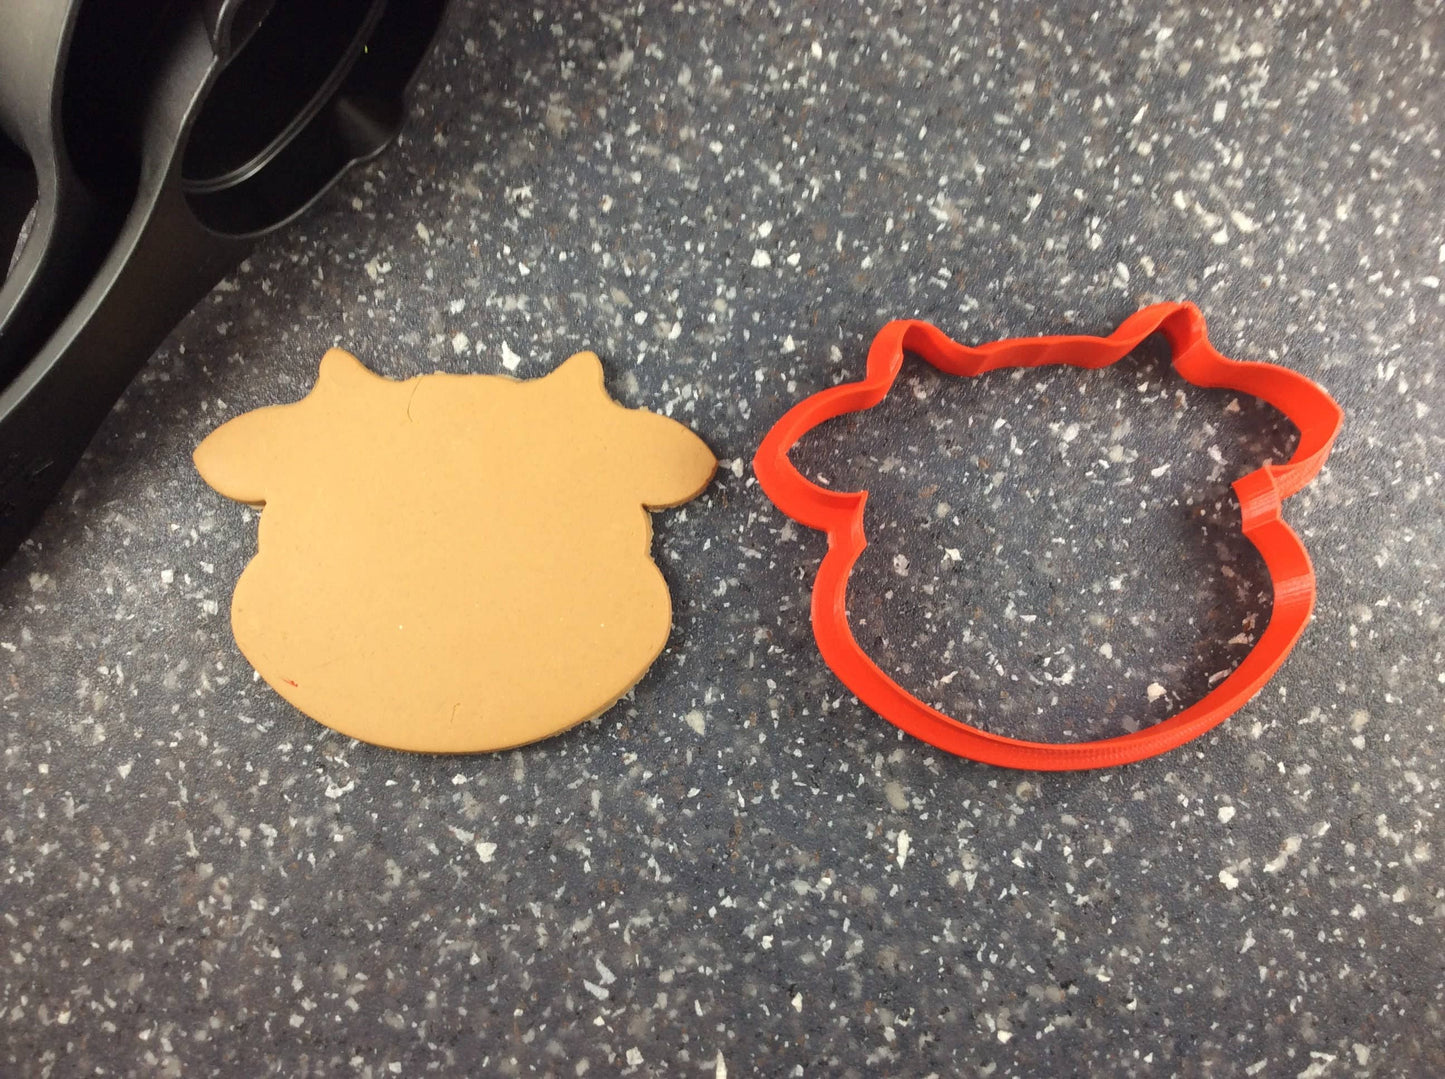 Cow Face Cookie Cutter: 3